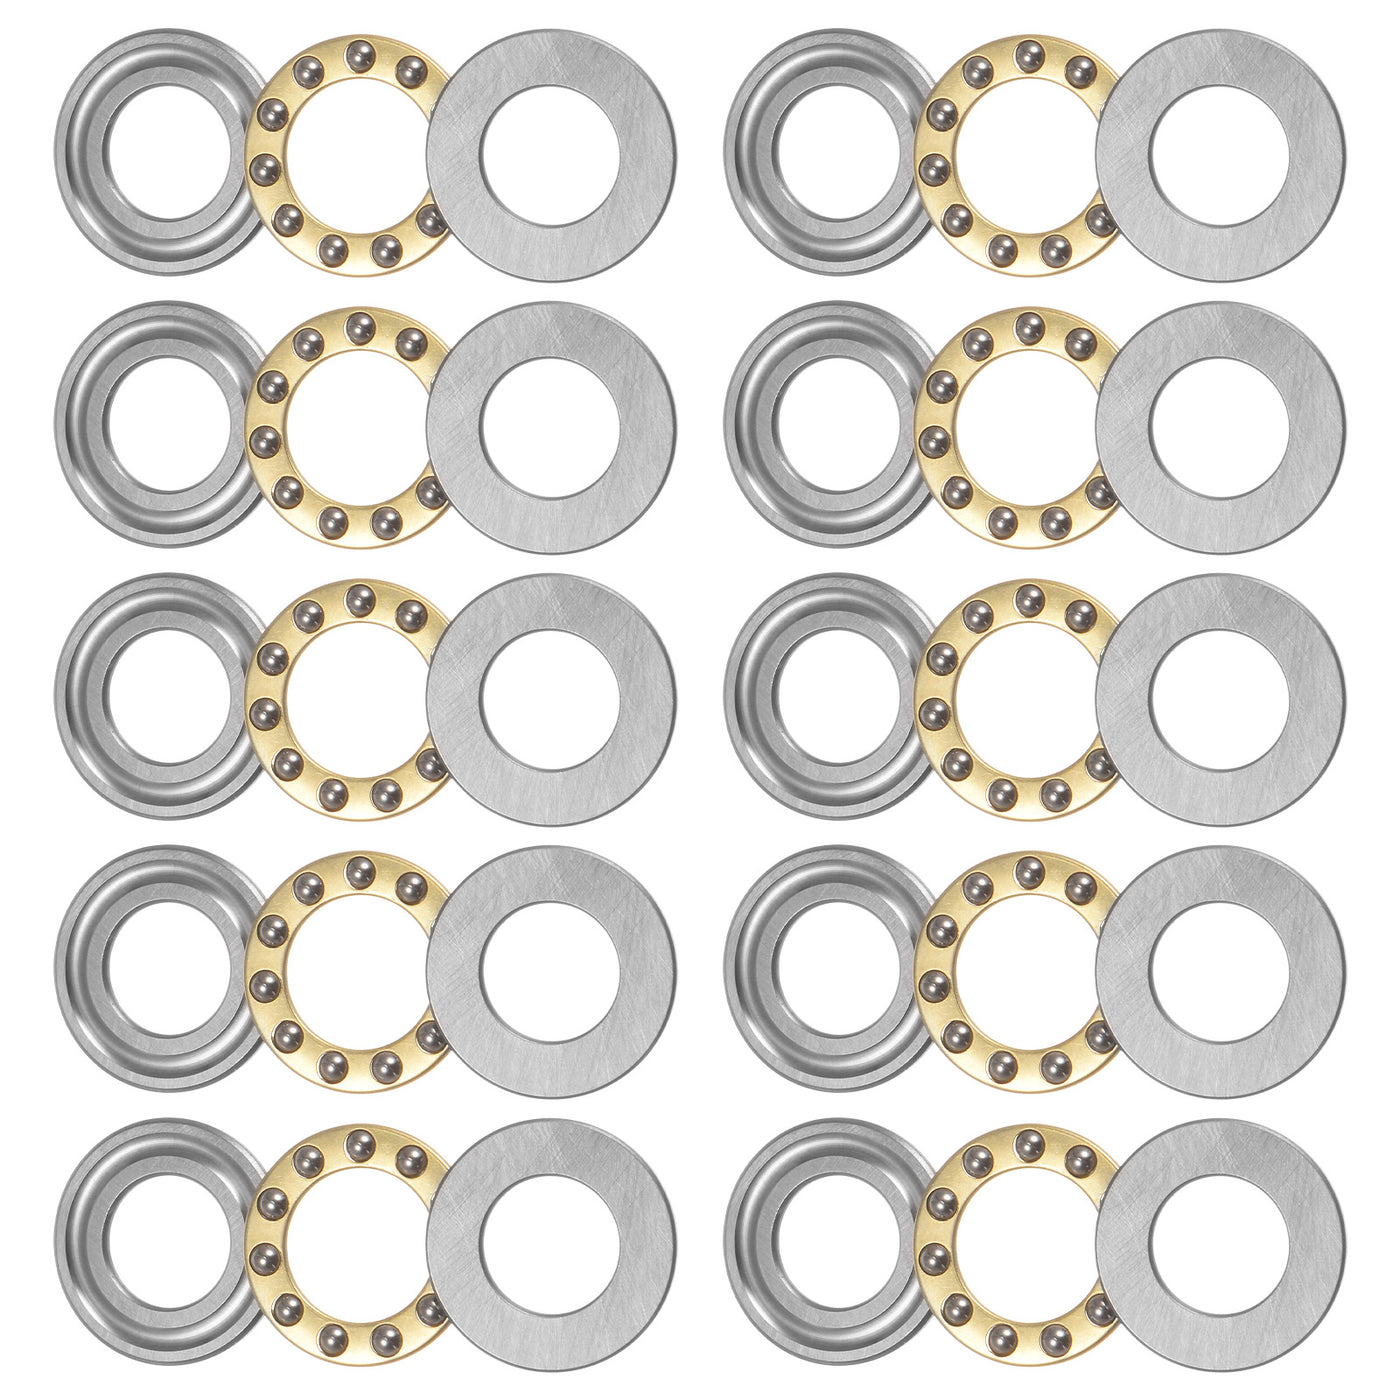 uxcell Uxcell F12-21M Thrust Ball Bearing 11x21x5mm Brass with Washers 10pcs